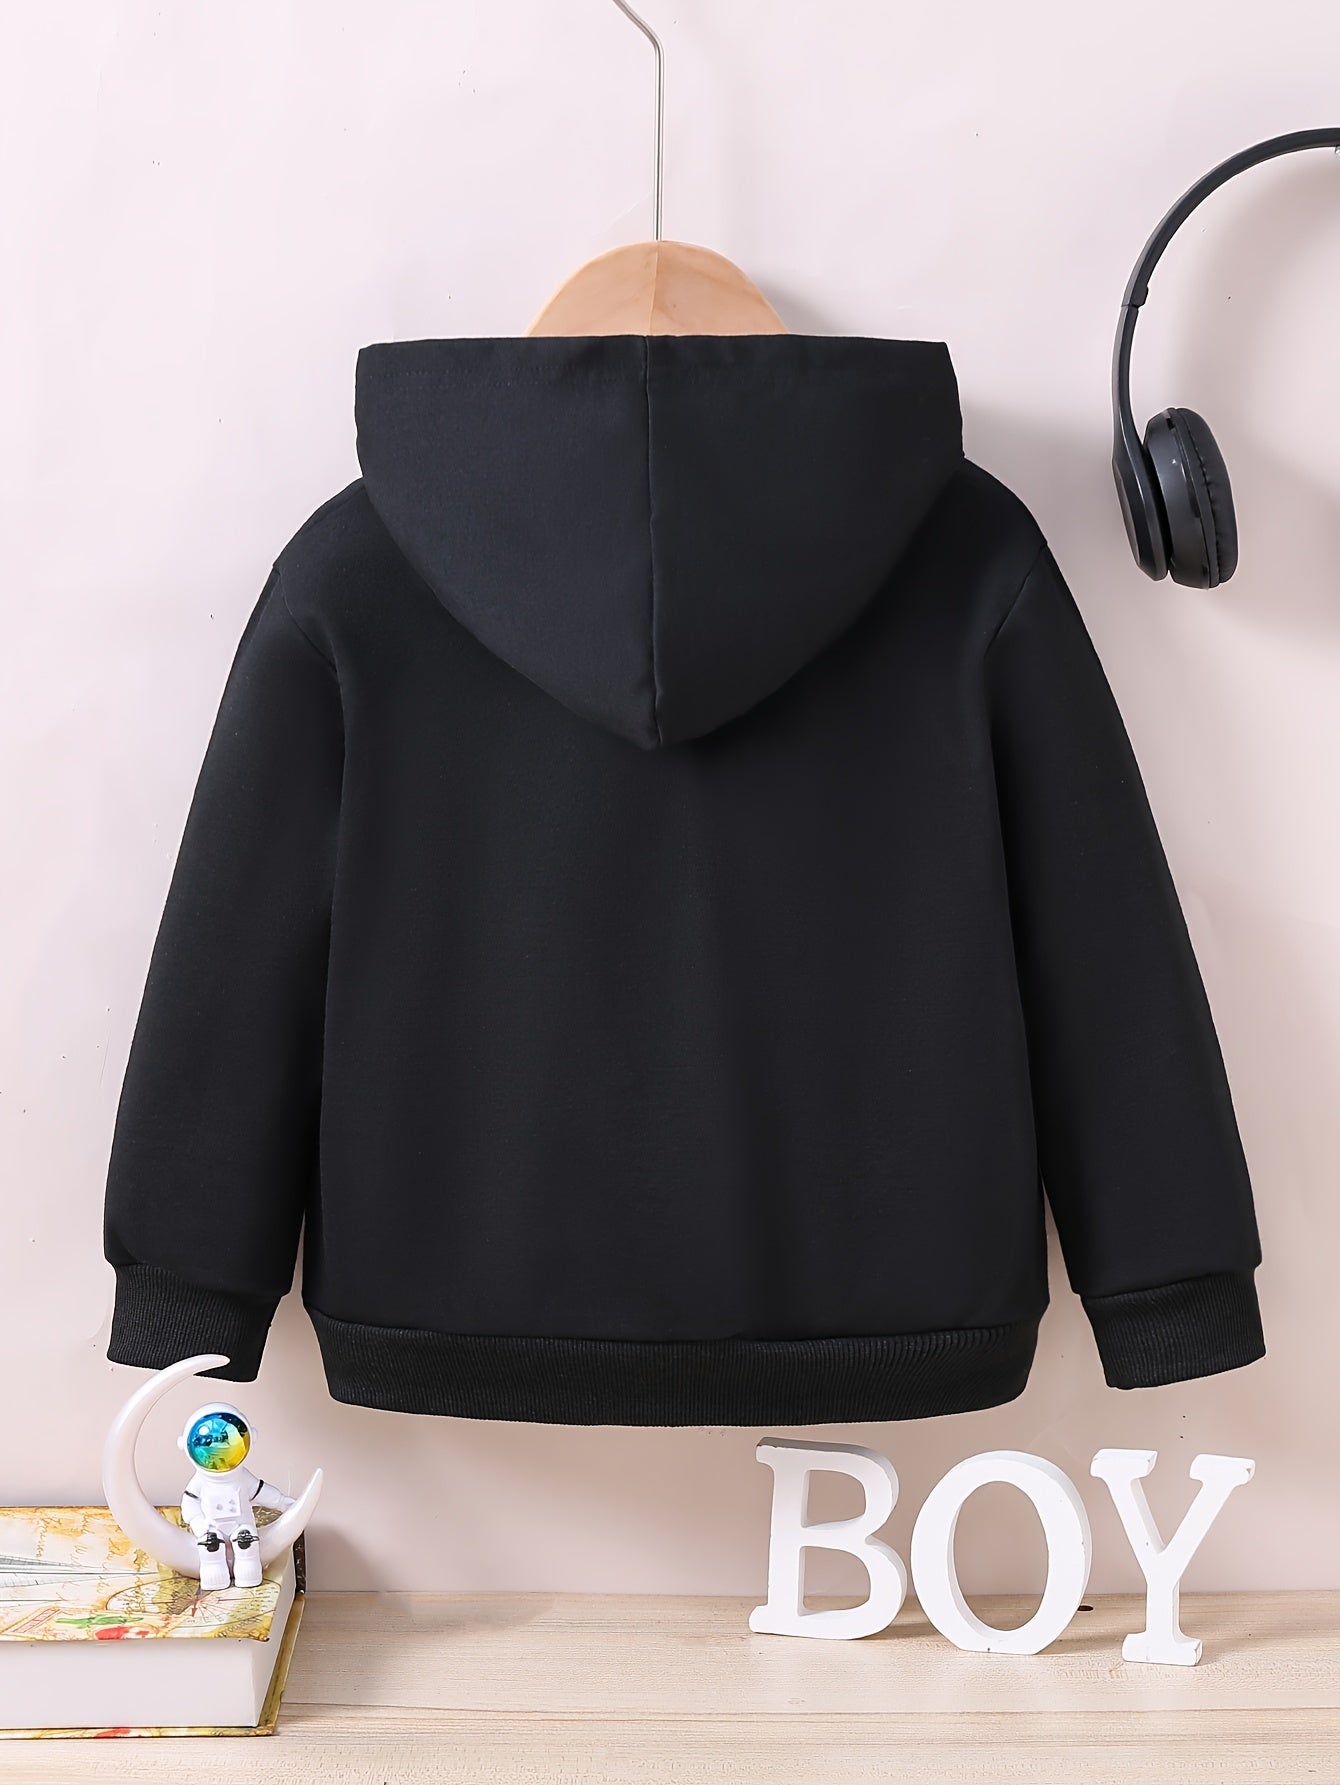 Creative Game Console Print Hoodie For Kids, Casual Pullover, Hooded Long Sleeve Top, Boy's Clothes For Spring Fall Winter, As Gift